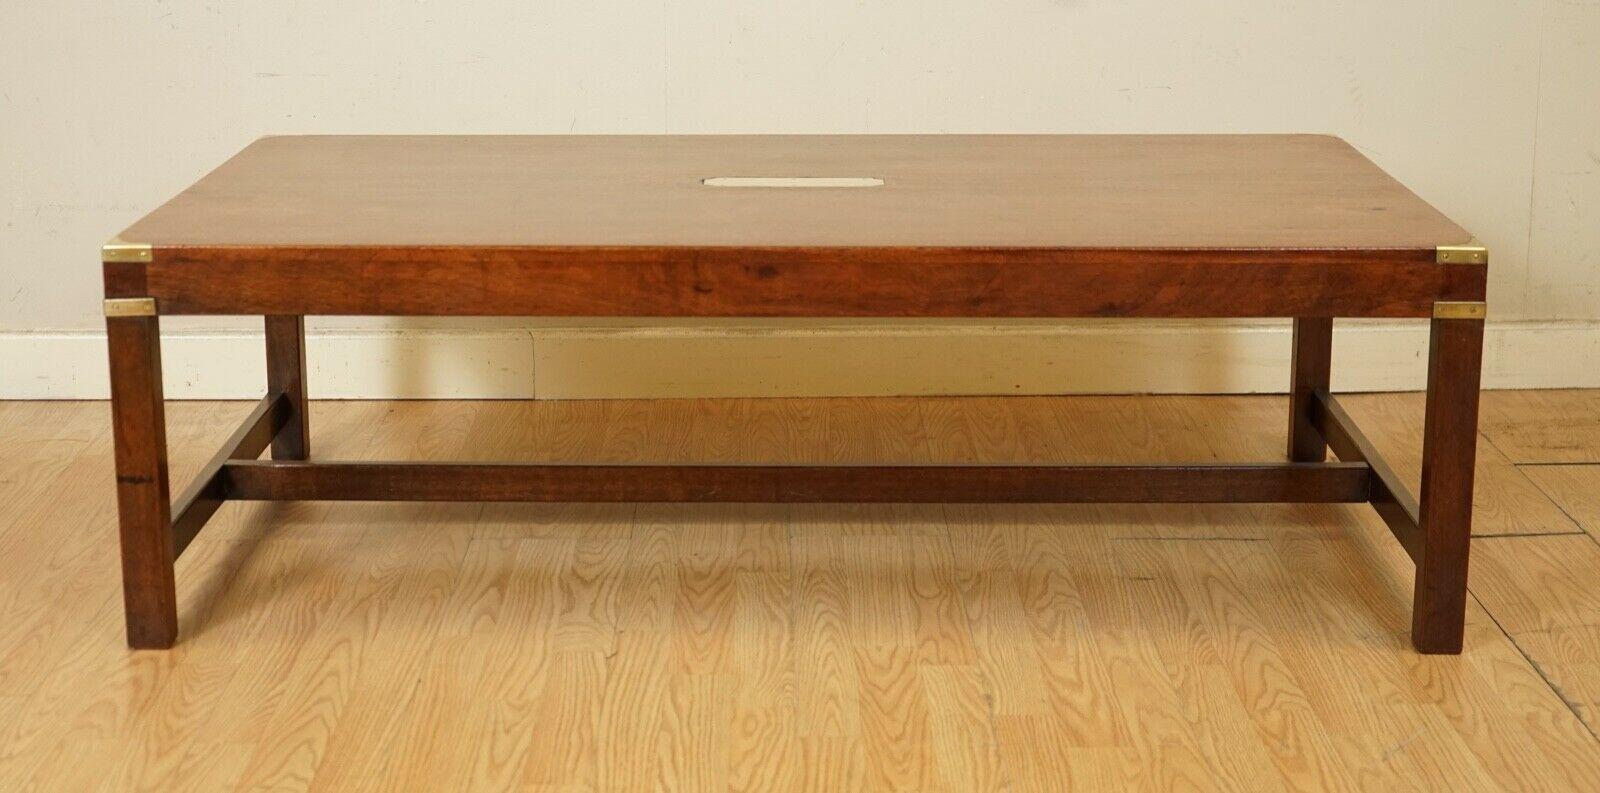 Hardwood Large Harrods Kennedy Military Campaign Coffee Table